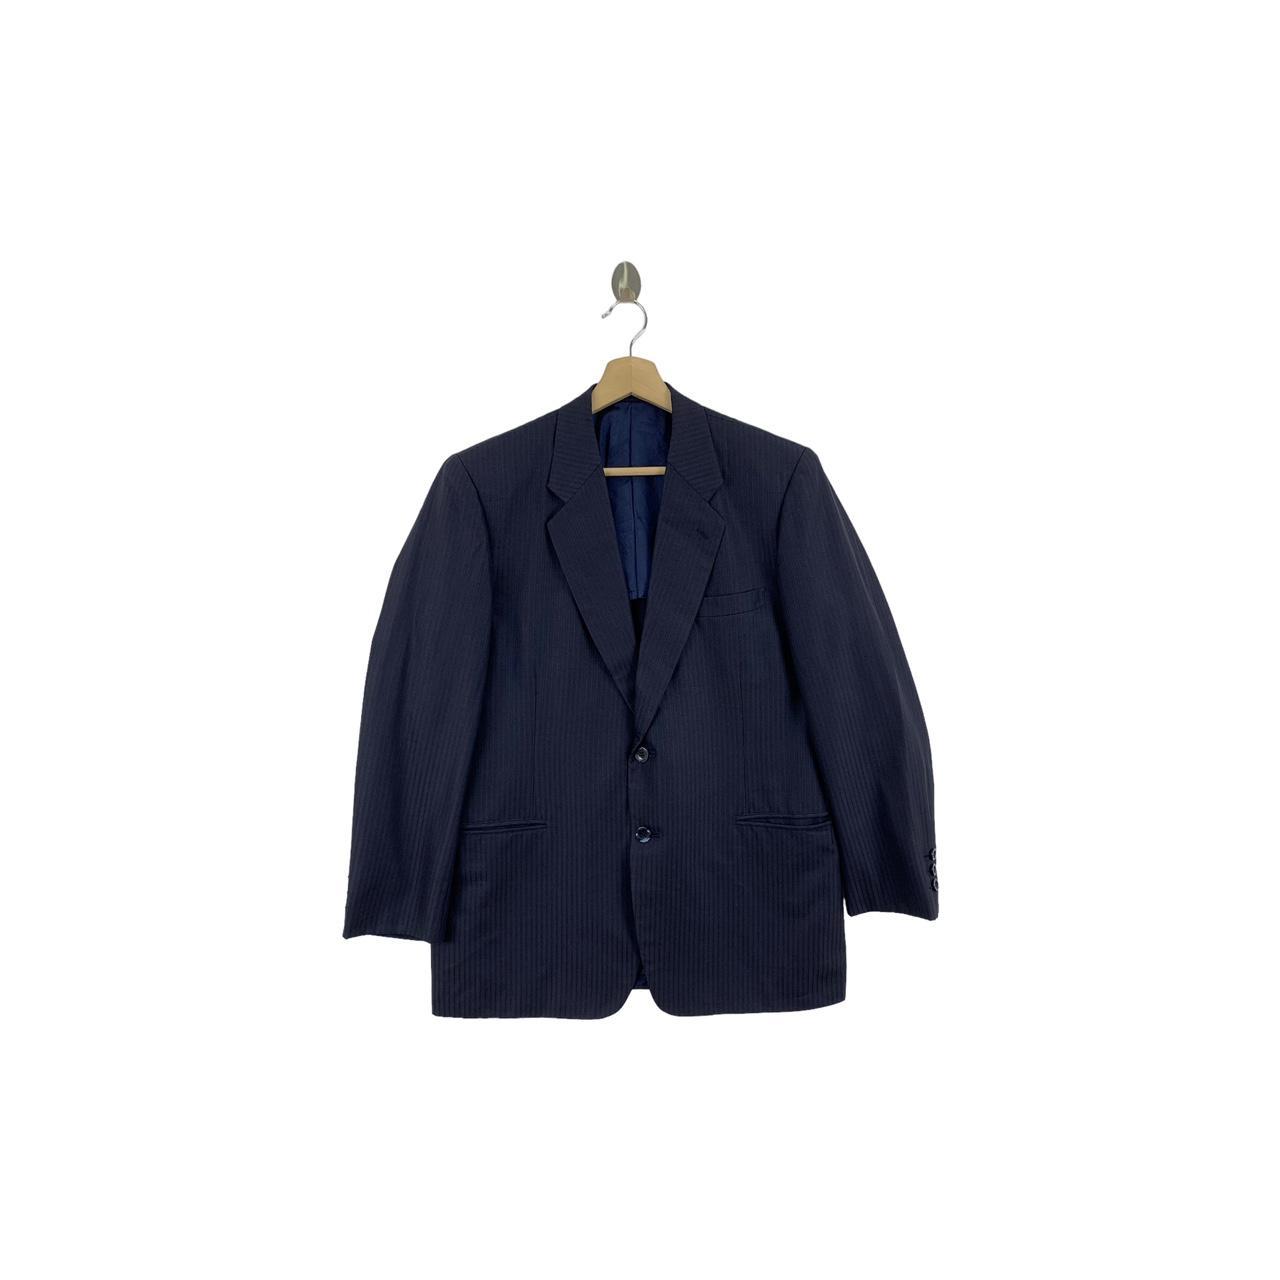 Dunhill Men's Navy Tailored-jackets